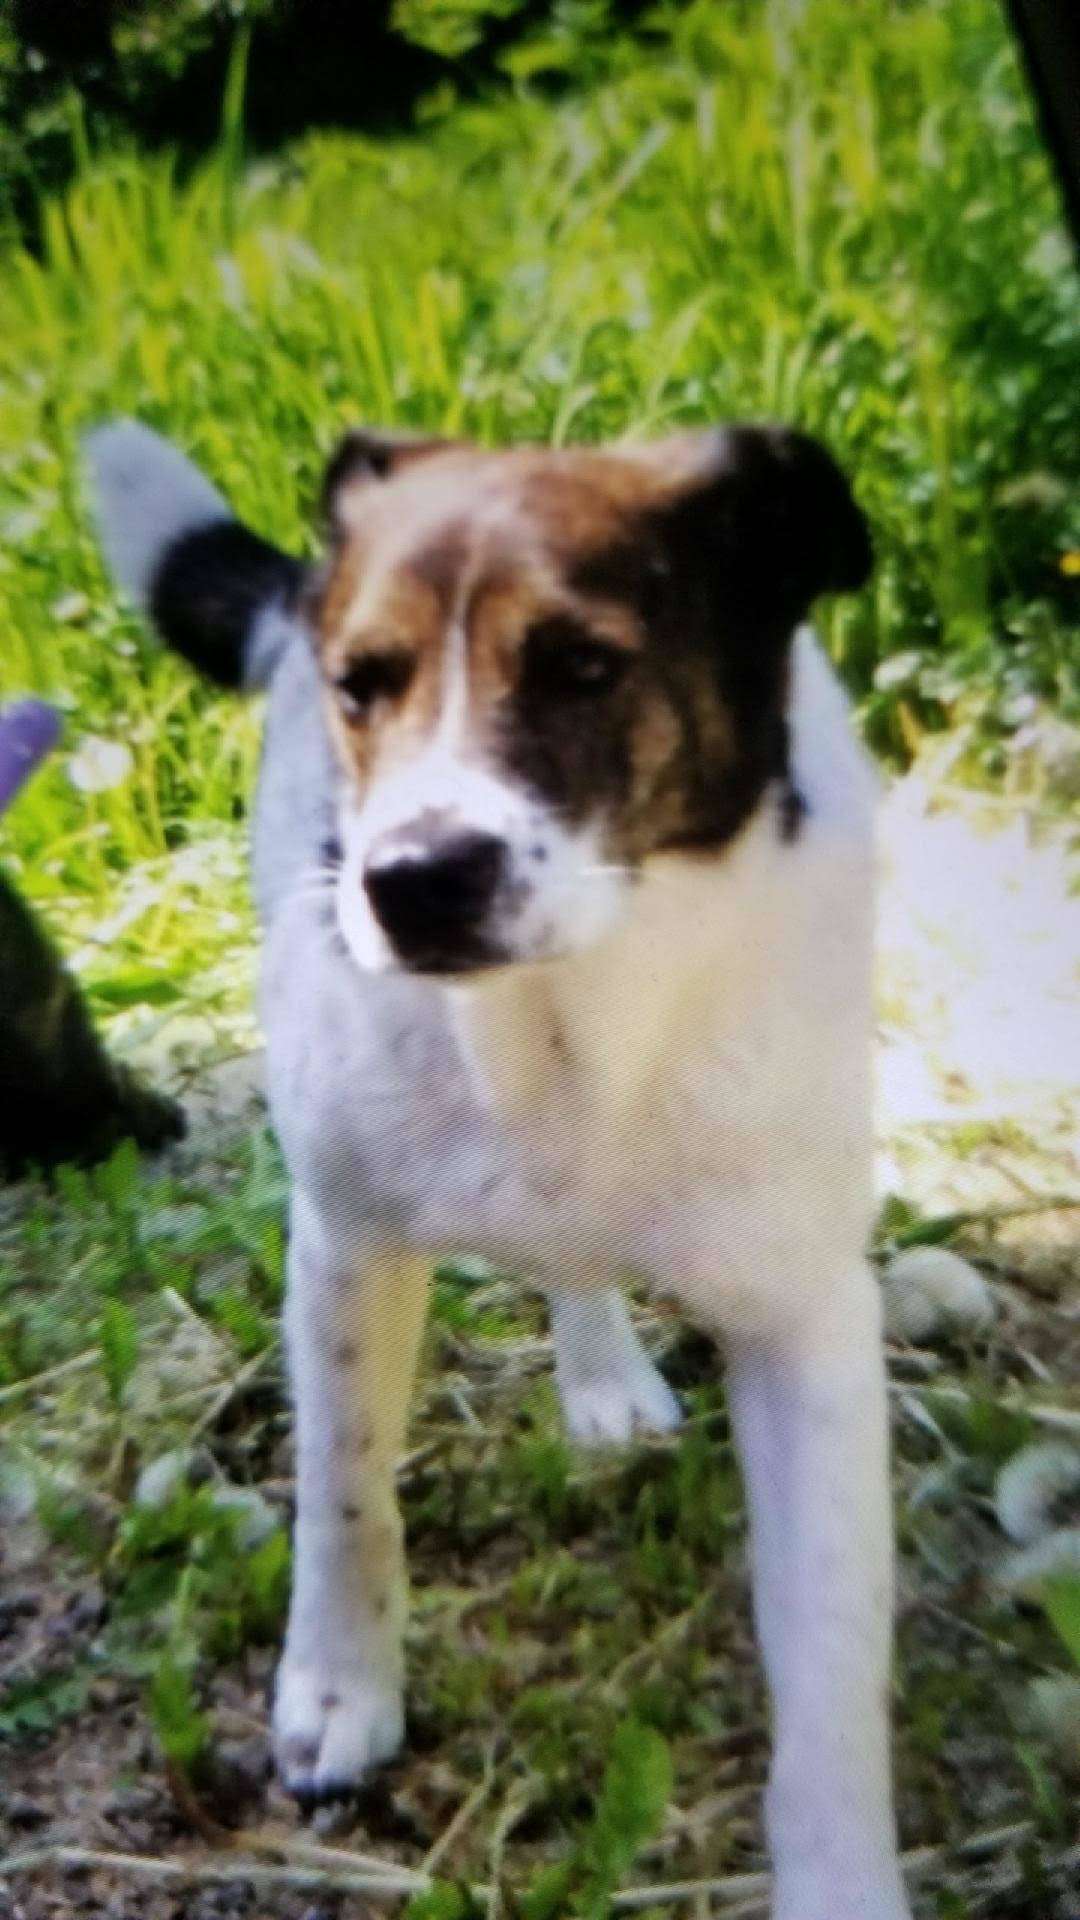 Angie and Eric Larsen’s dog Daisy, an 11-year-old mixed breed, was one of three dogs killed by a brown bear recently in Hoonah. (Courtesy photo)